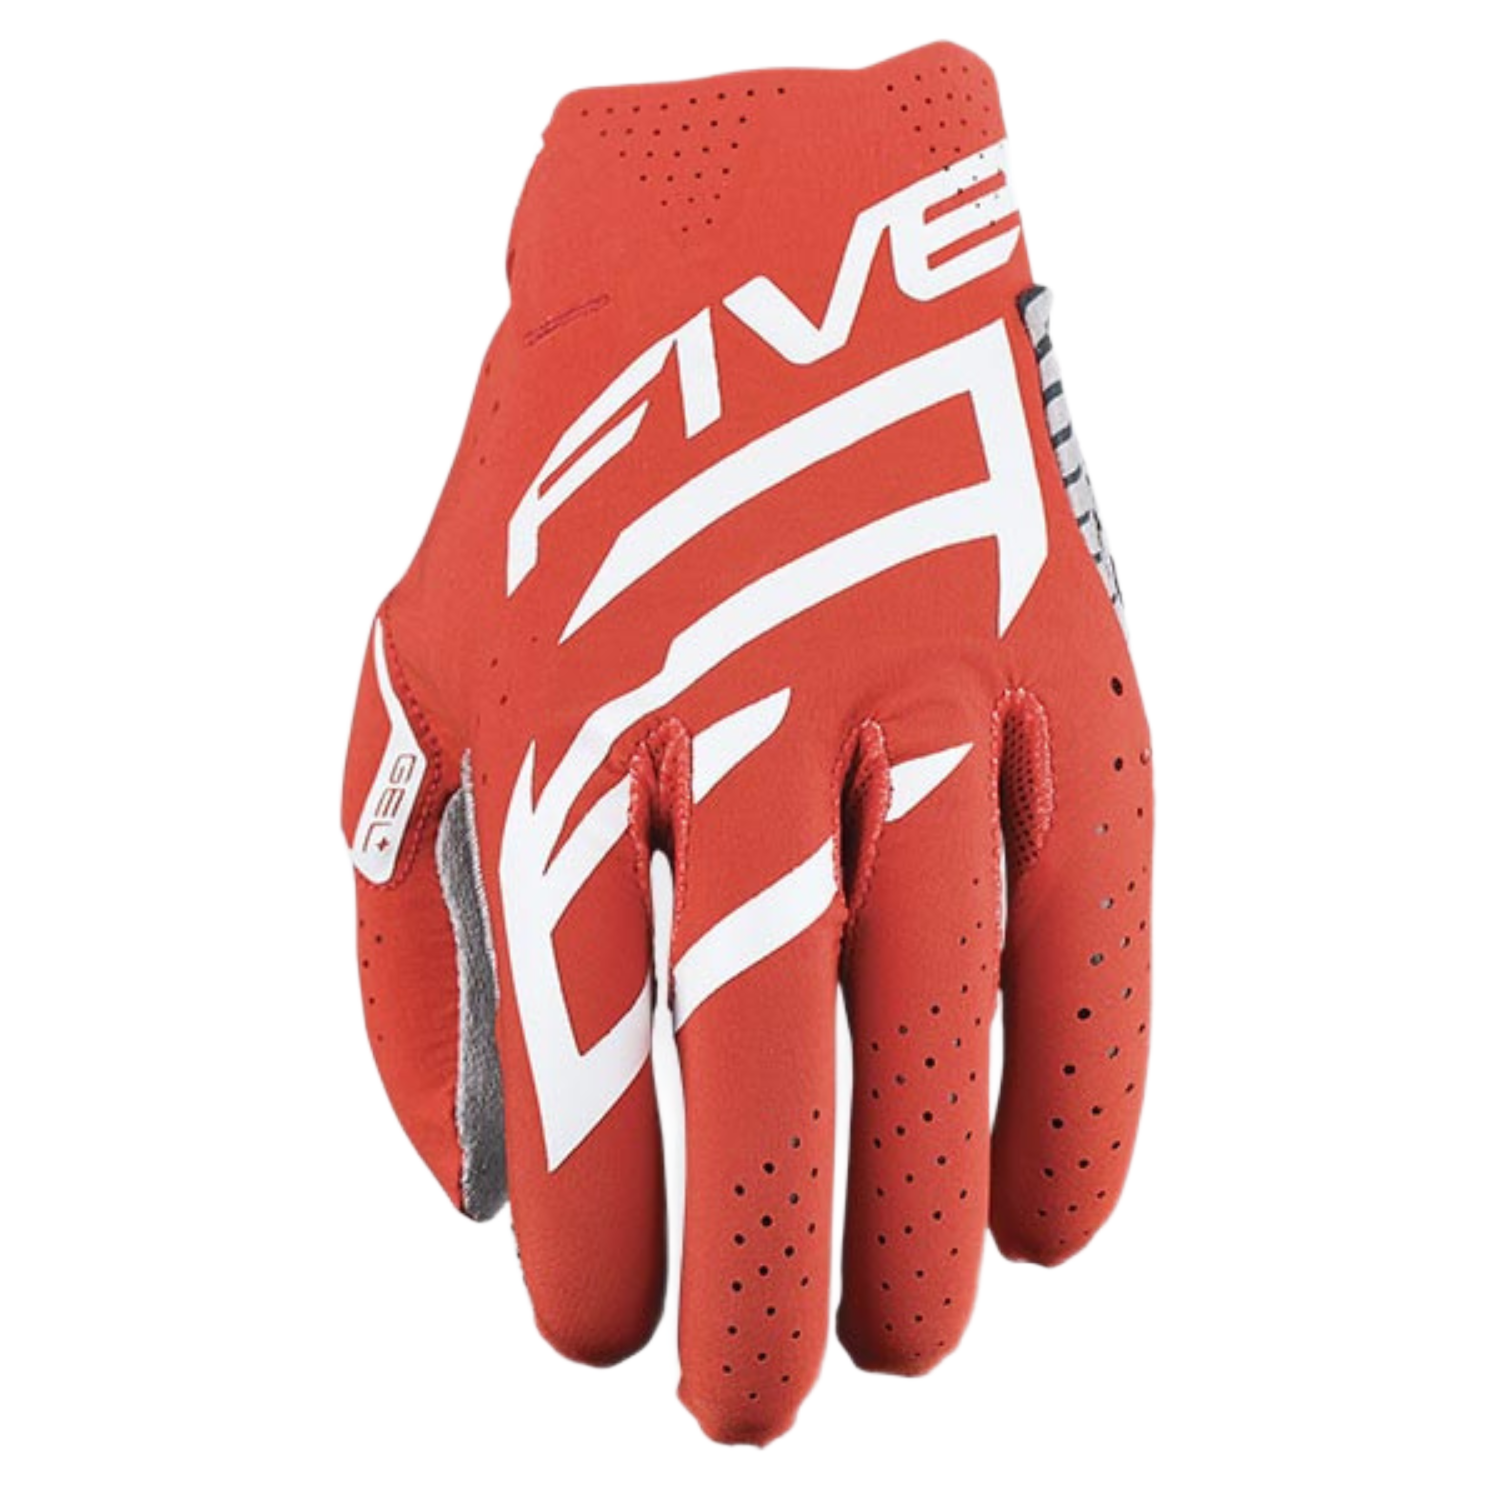 Image of Five MXF Race Gloves Red Size S ID 3841300111501